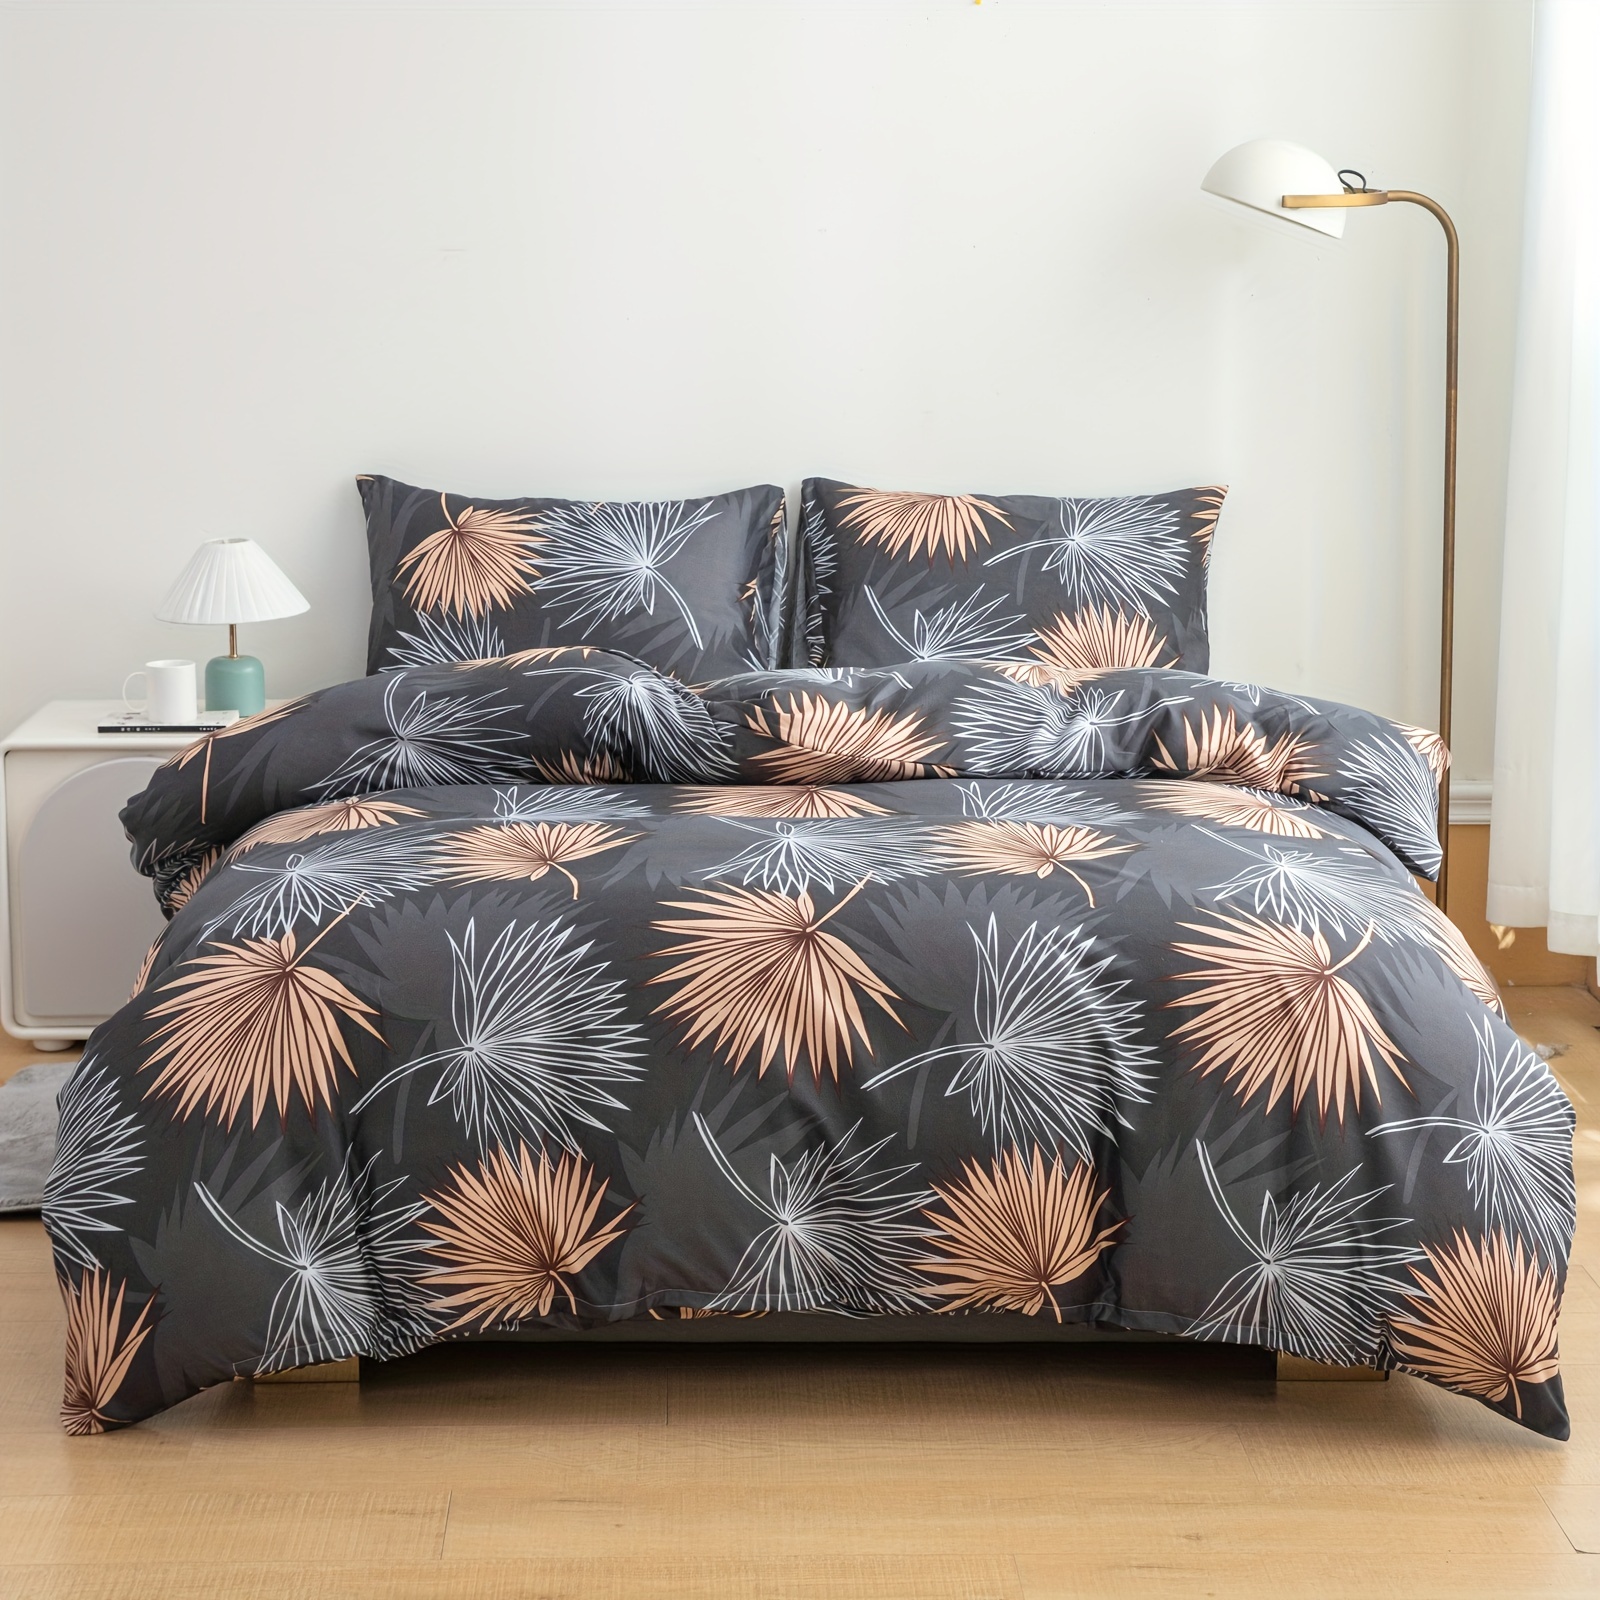 

3pcs Dark Gray Leaf Duvet Cover Set (1 Duvet Cover + 2 Pillowcases, Without Core), Super Soft And Comfortable Breathable Bedding Set With Zipper, Suitable For Bedrooms And Guest Rooms